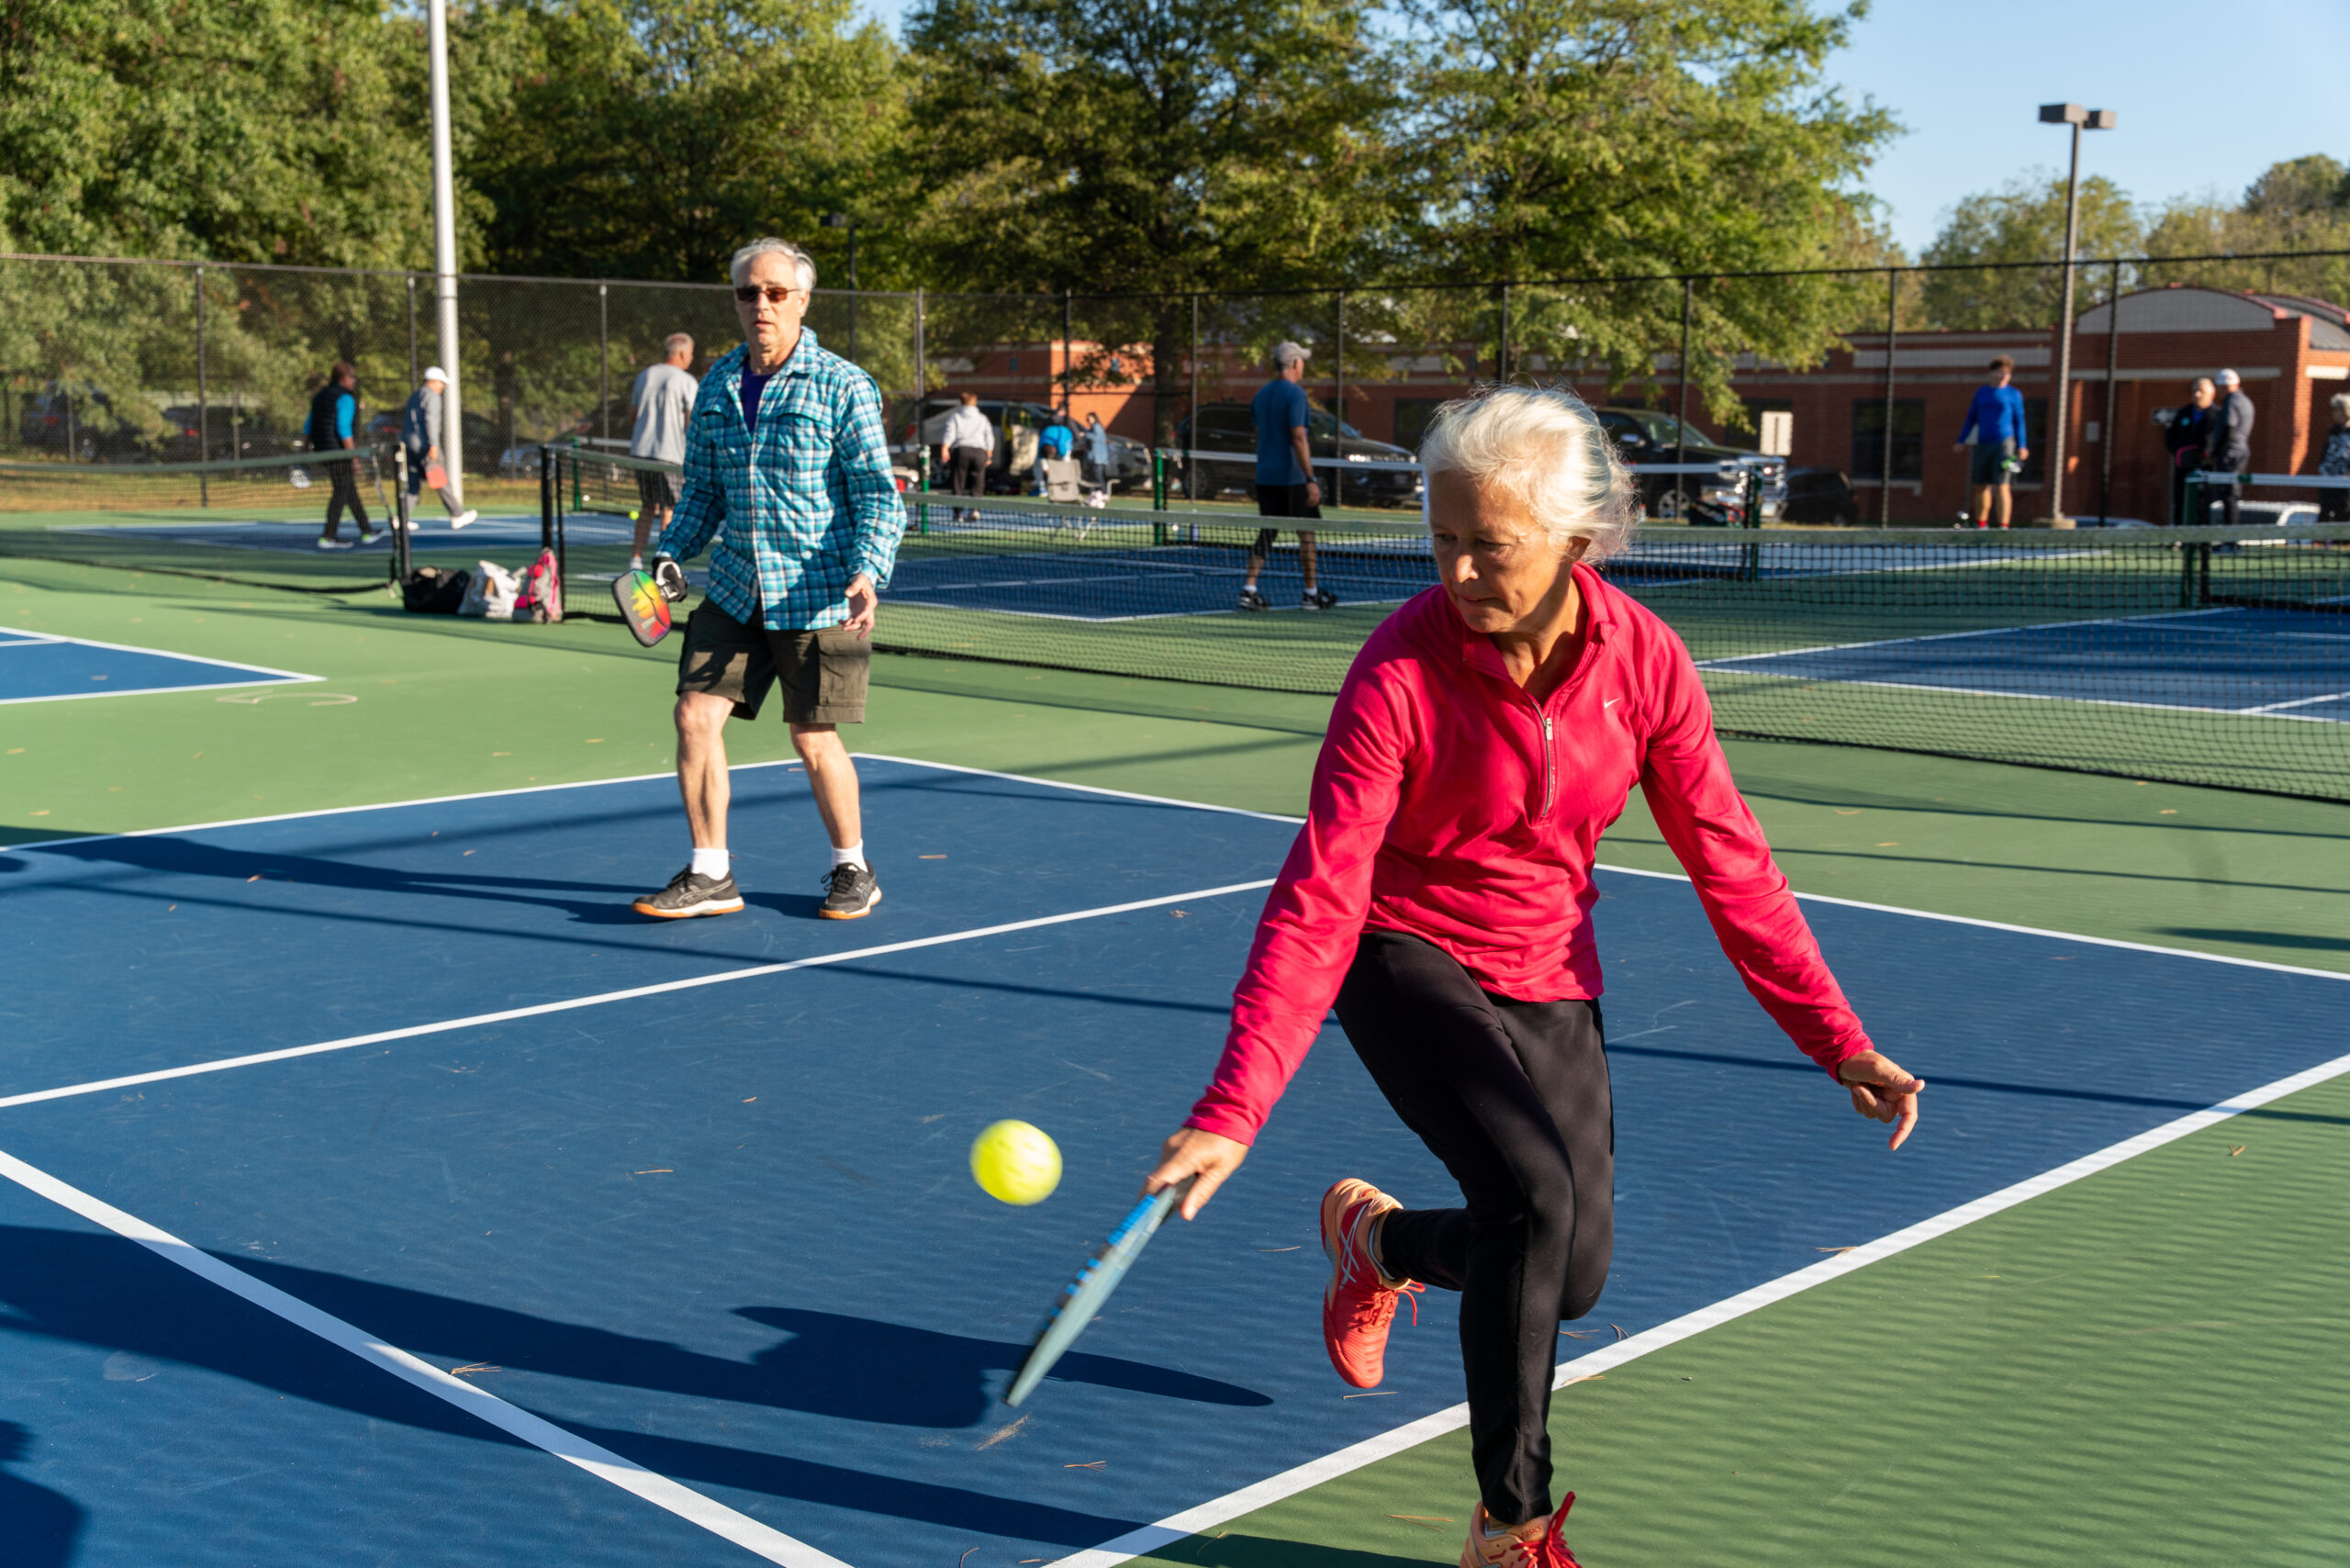 pickleball players on the court